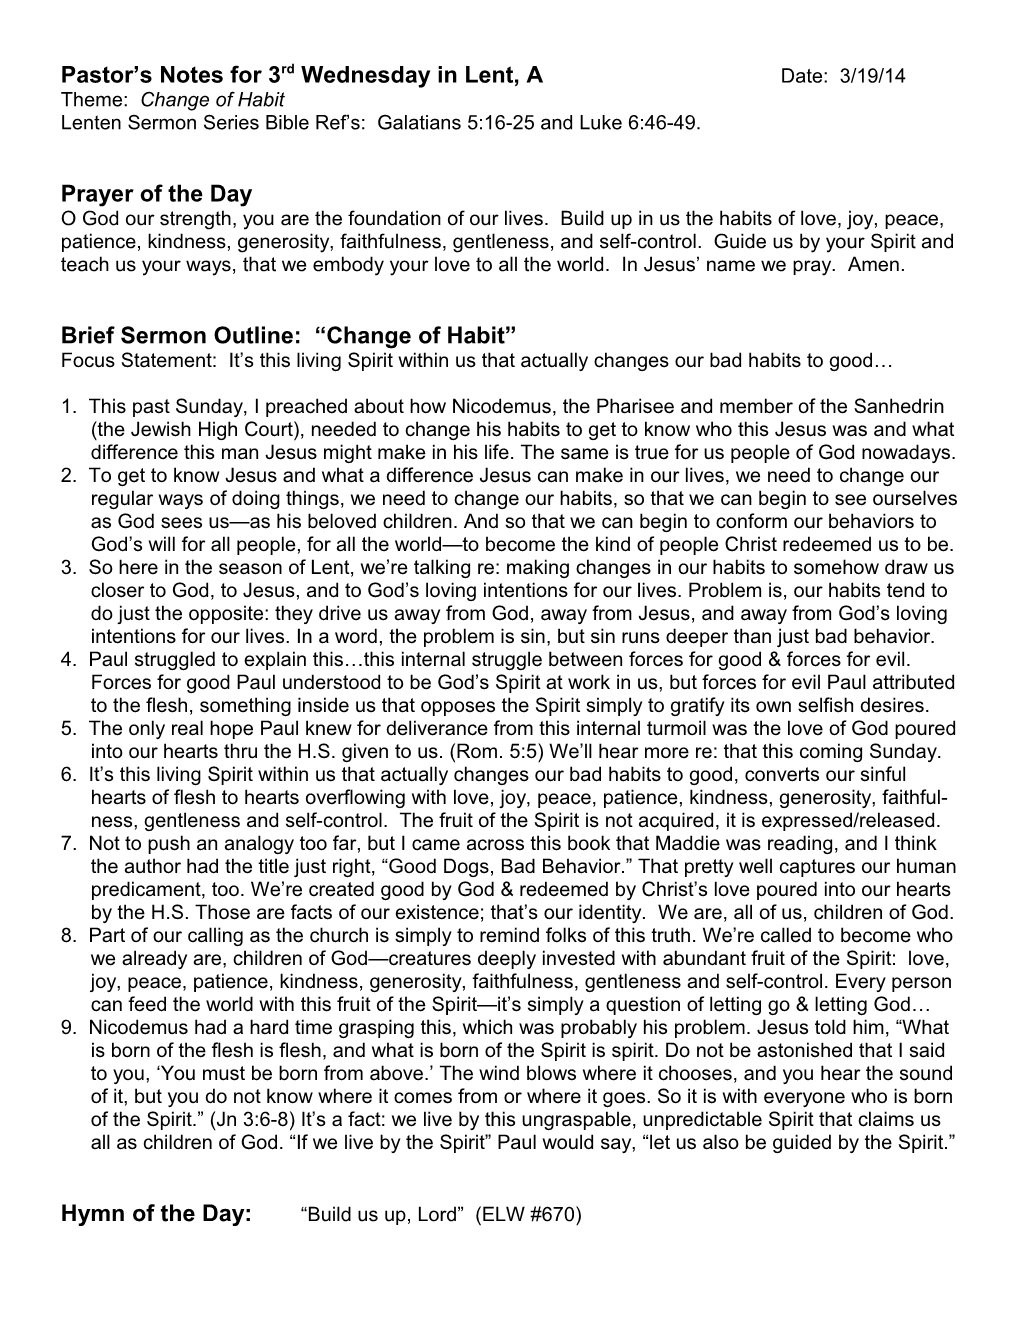 Pastor S Notes for 3Rd Wednesday in Lent, a Date: 3/19/14